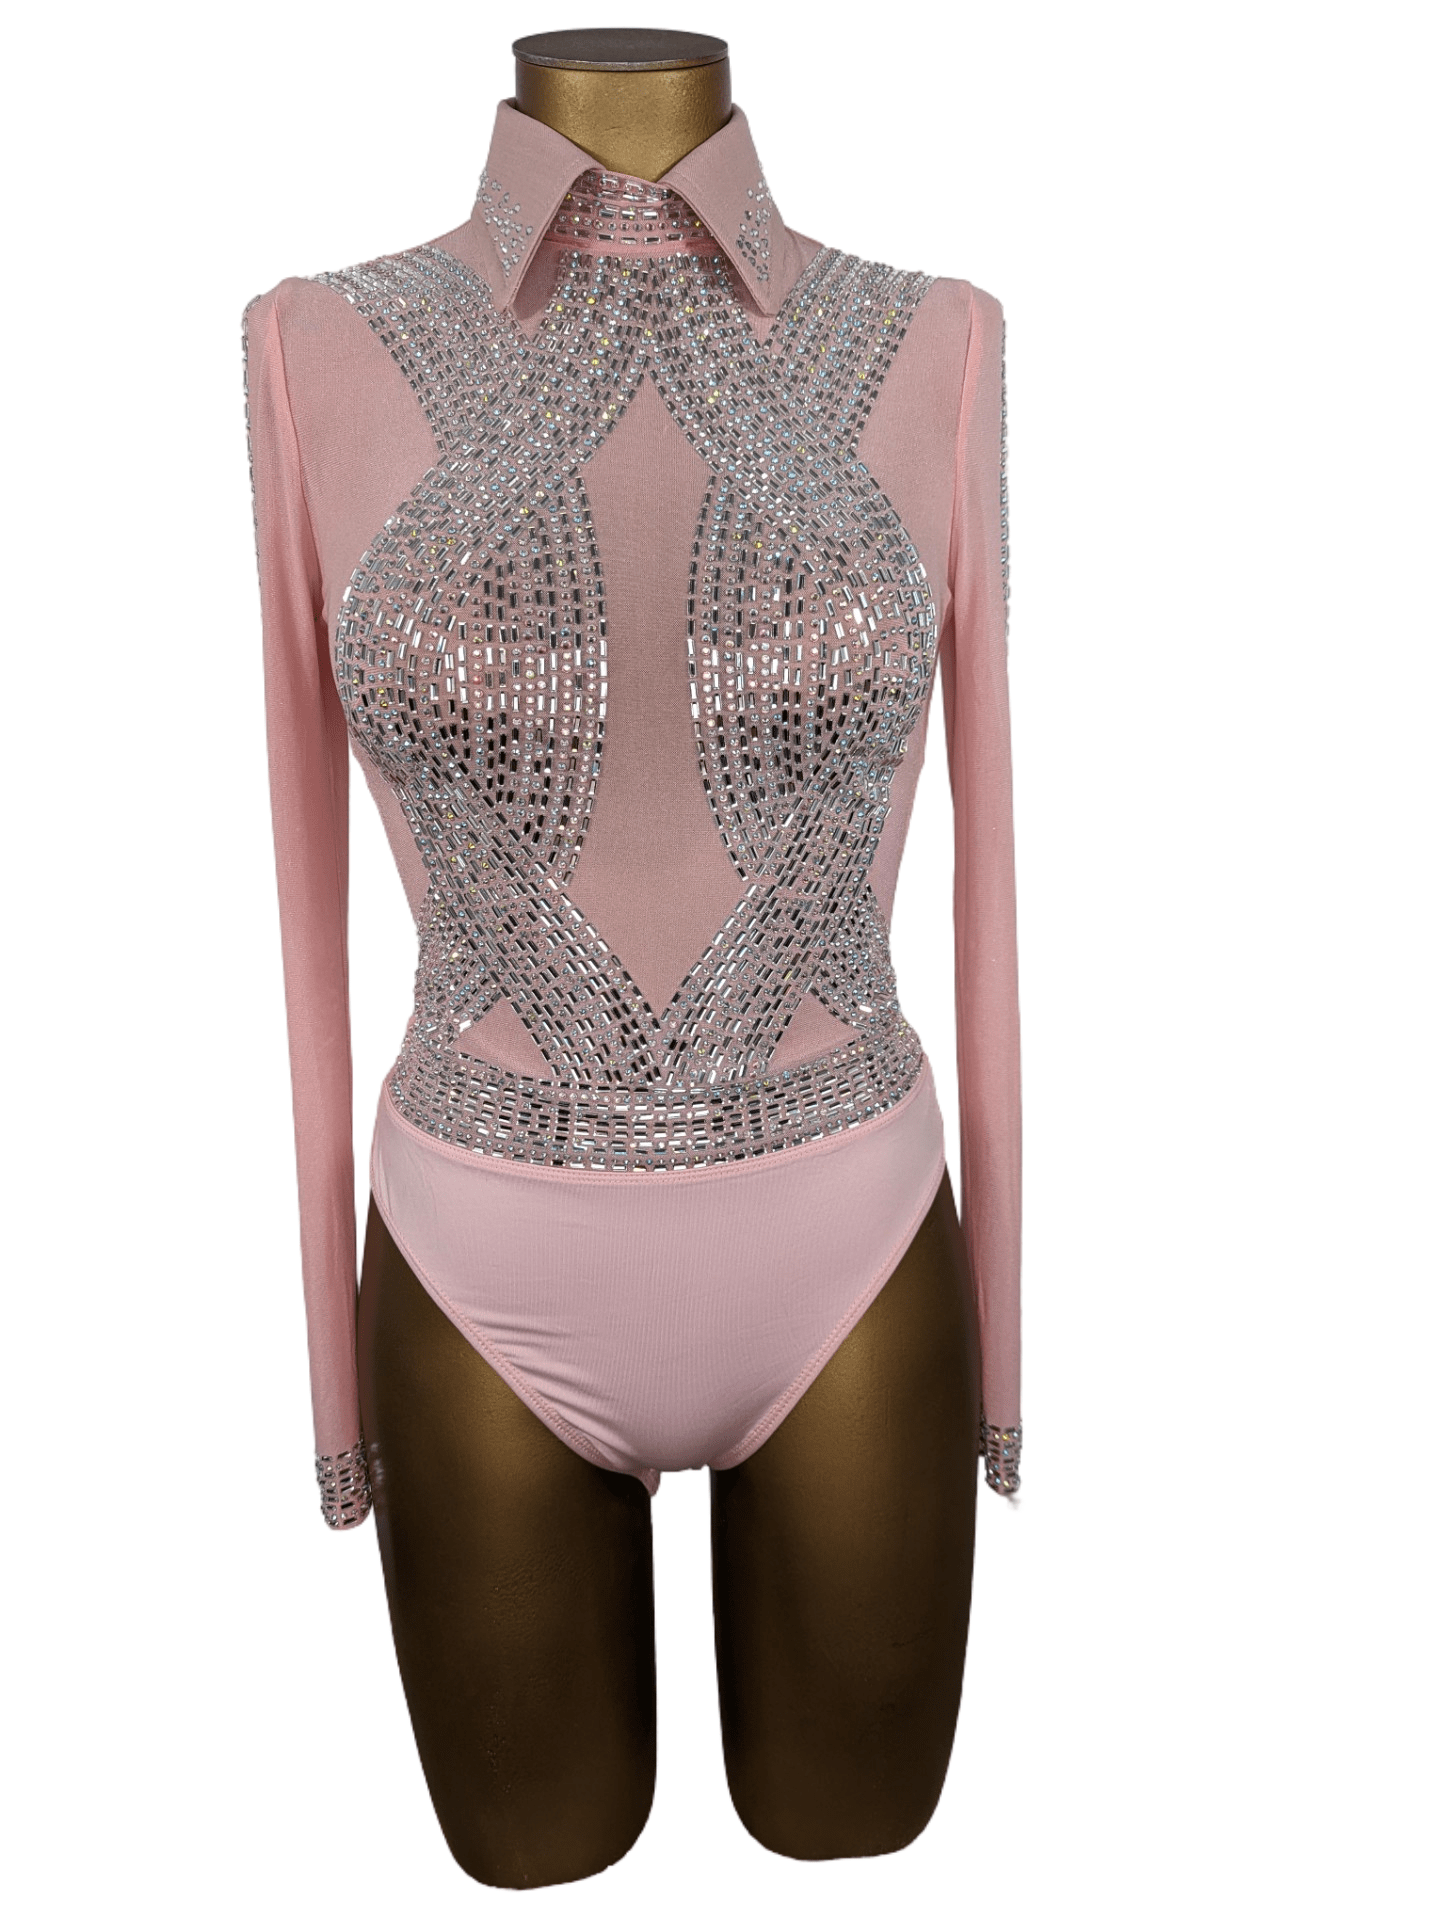 sparkle-ridge-womens-western-wear-affordable-show-clothes-horse-shirts-with-bling-rodeo-bodysuit-light-pink-elegant-darling-front.png